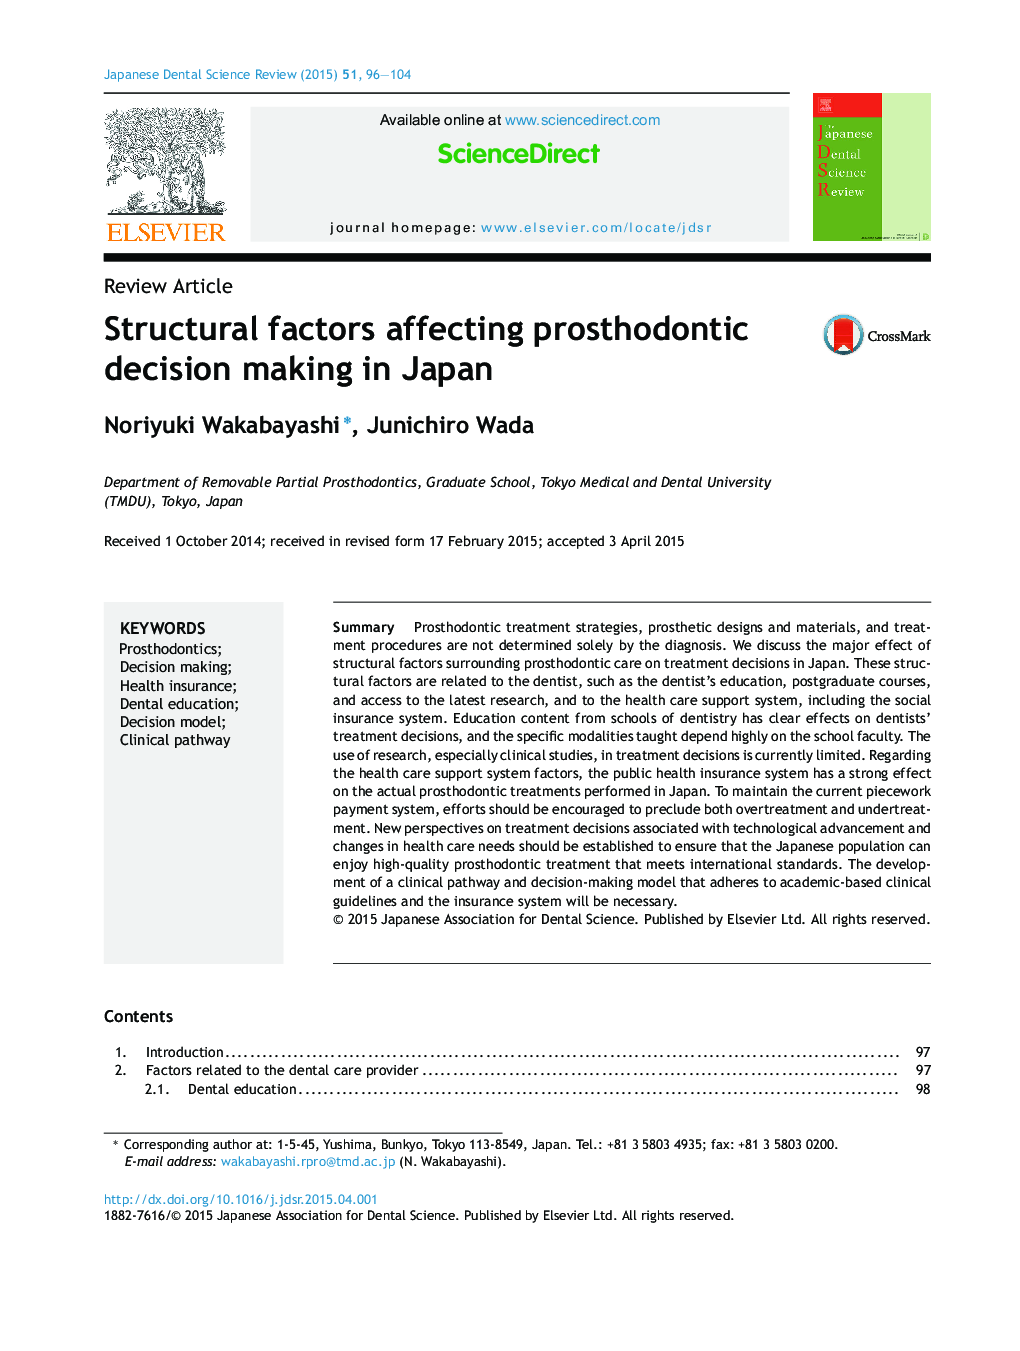 Structural factors affecting prosthodontic decision making in Japan